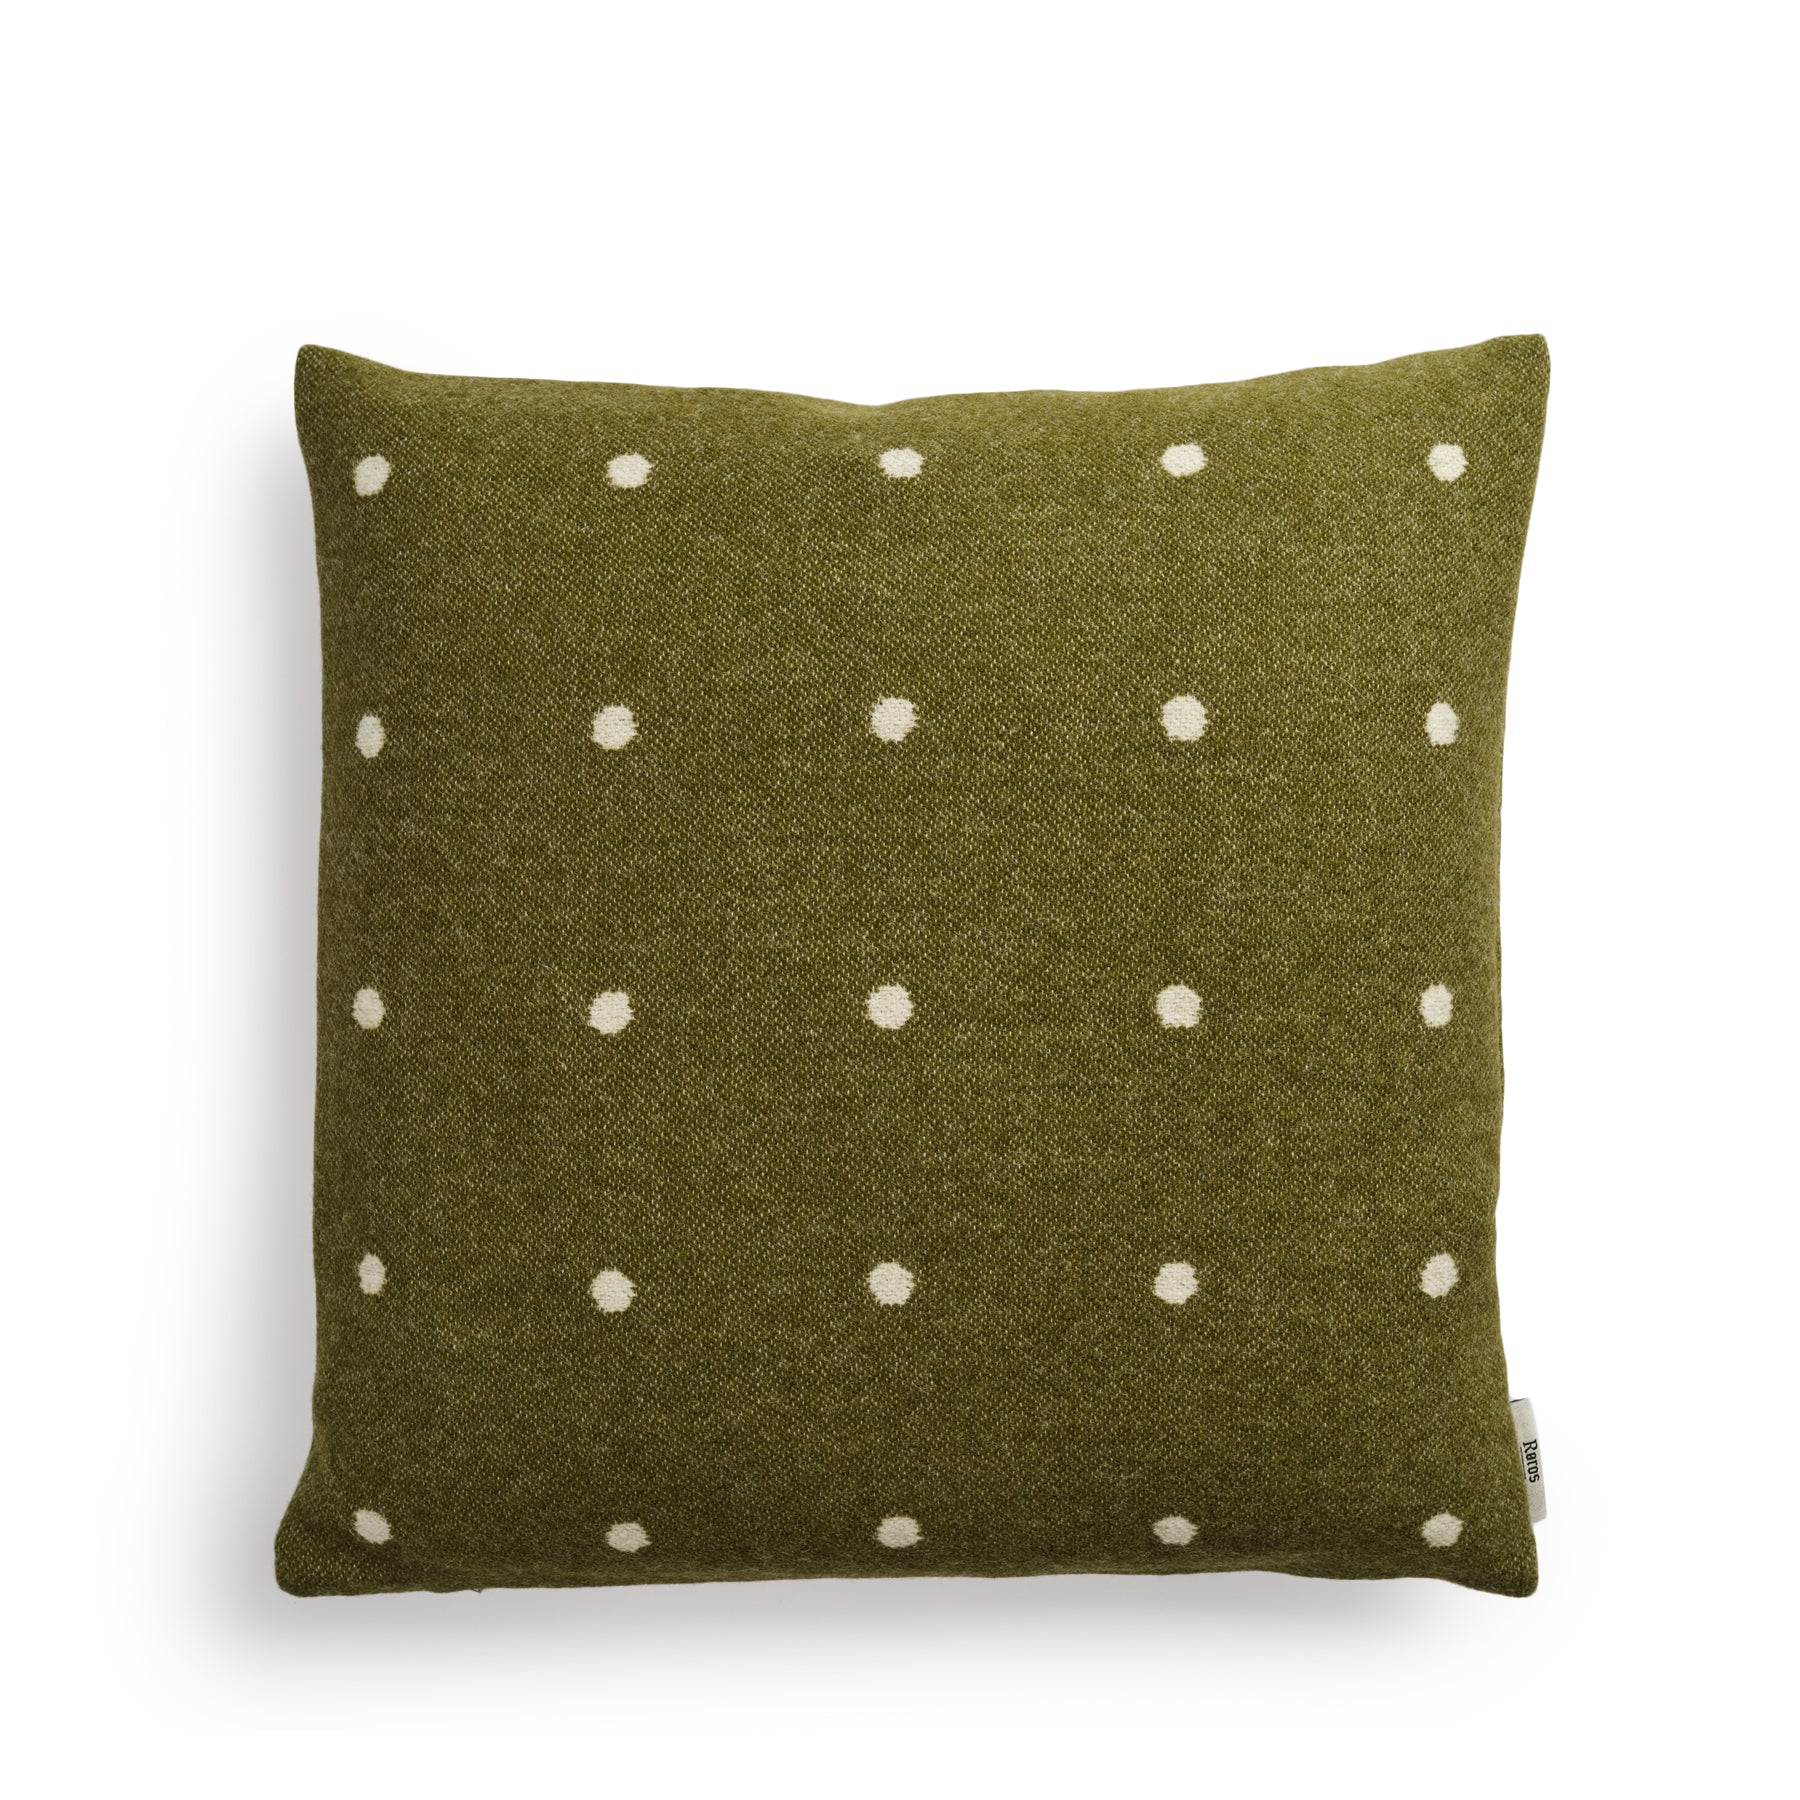 Pastille Pillow in Green Moss Zoom Image 1